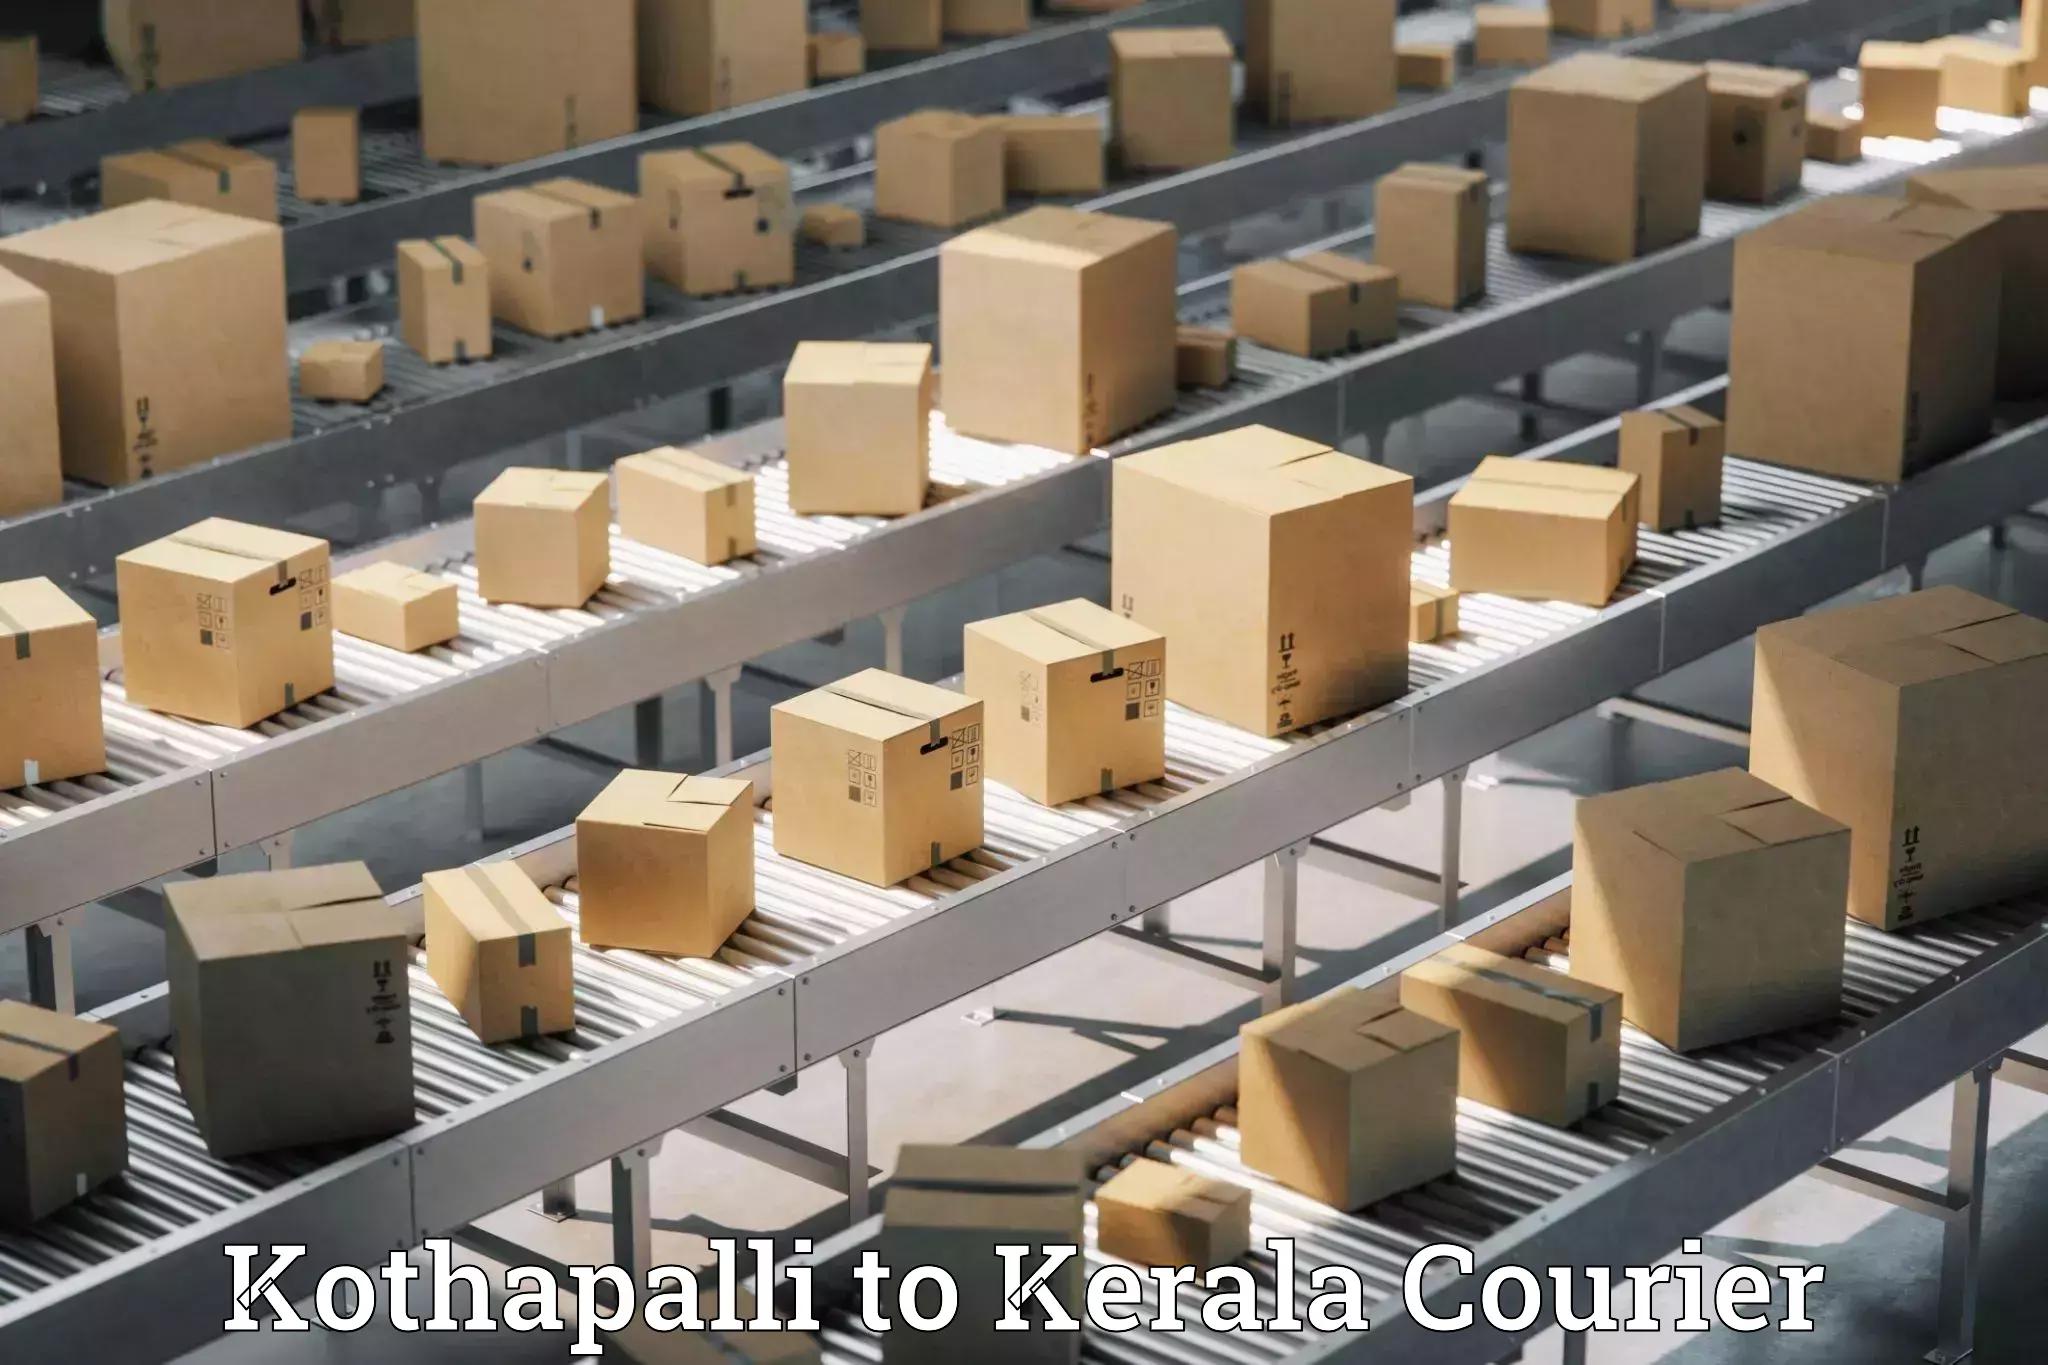 Seamless shipping experience in Kothapalli to Kerala